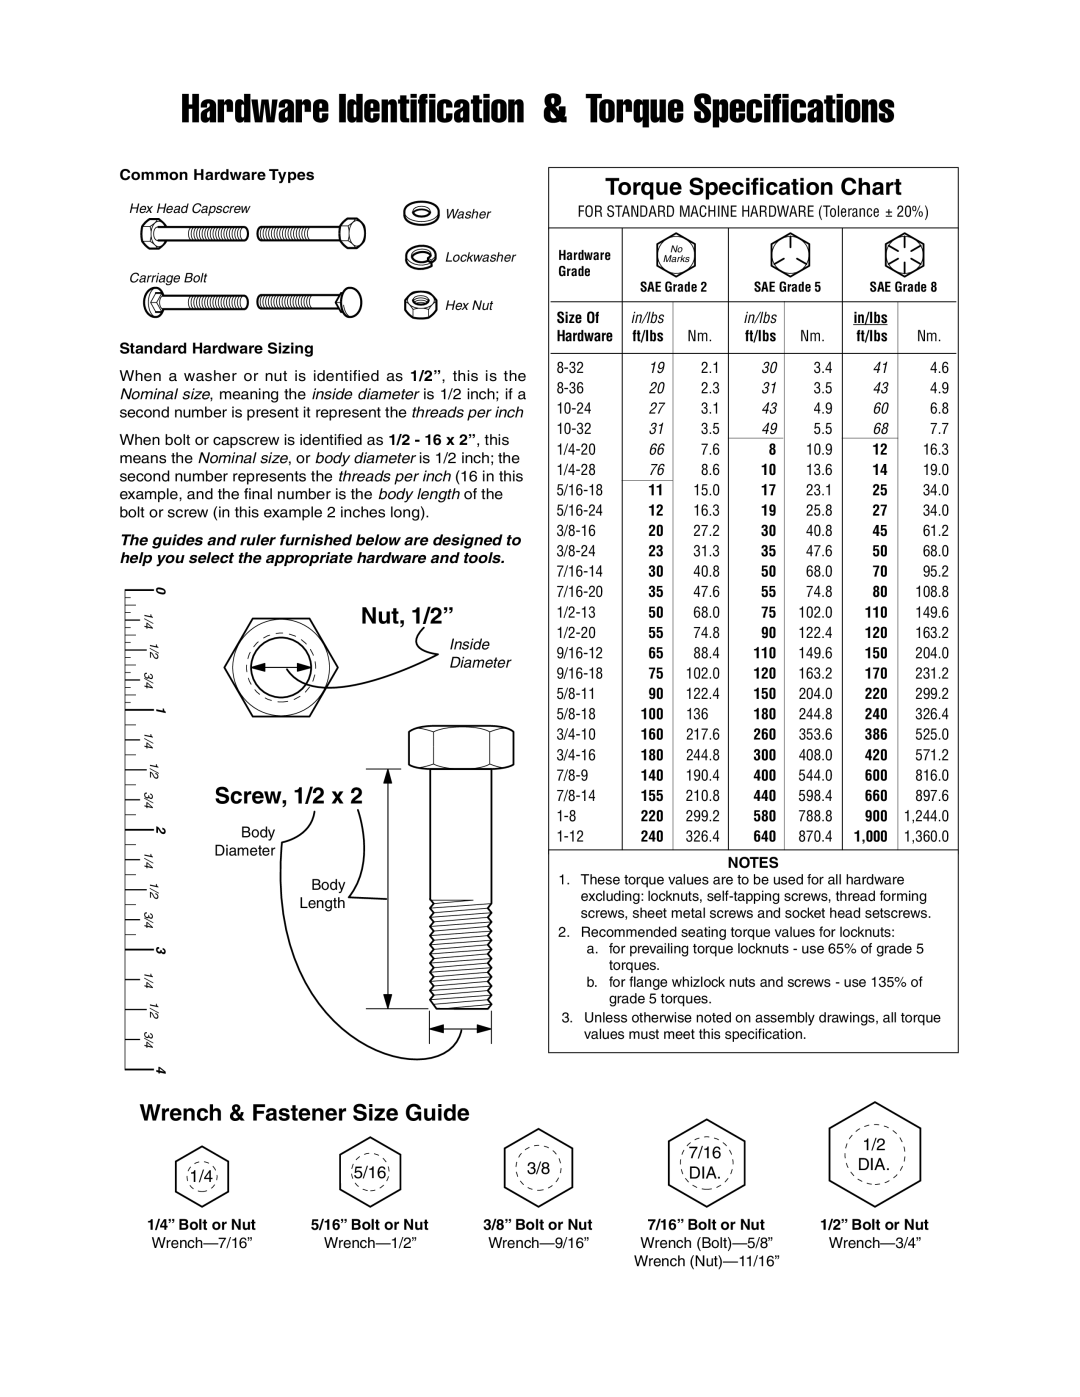 Simplicity 1695168 Wrench & Fastener Size Guide, Hardware Identification & Torque Specifications, Nut, 1/2”, Screw, 1/2 